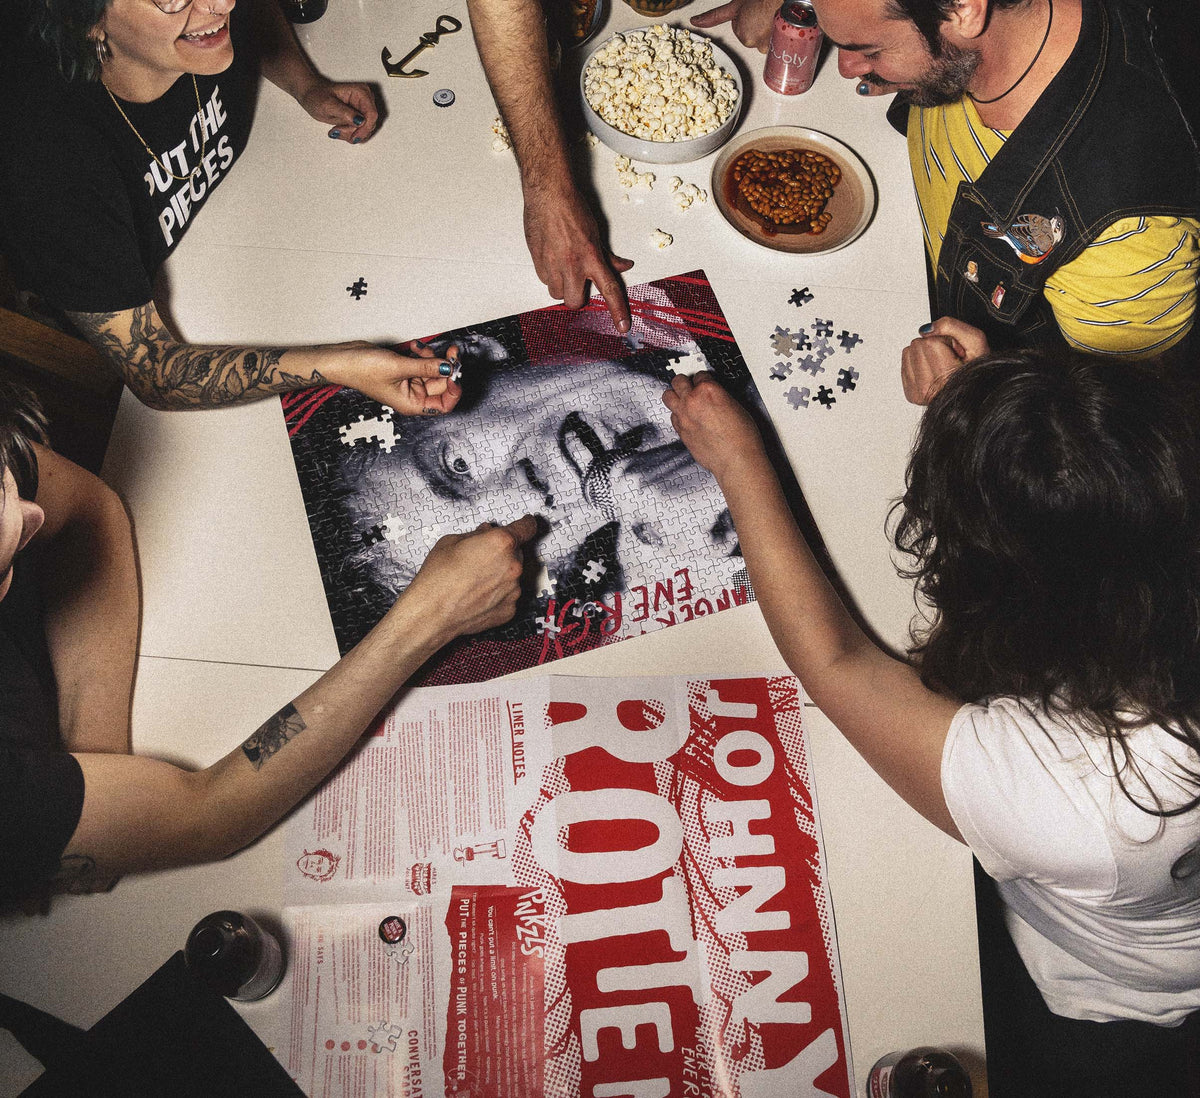 Overhead shot of people at a table, laughing and putting puzzle together